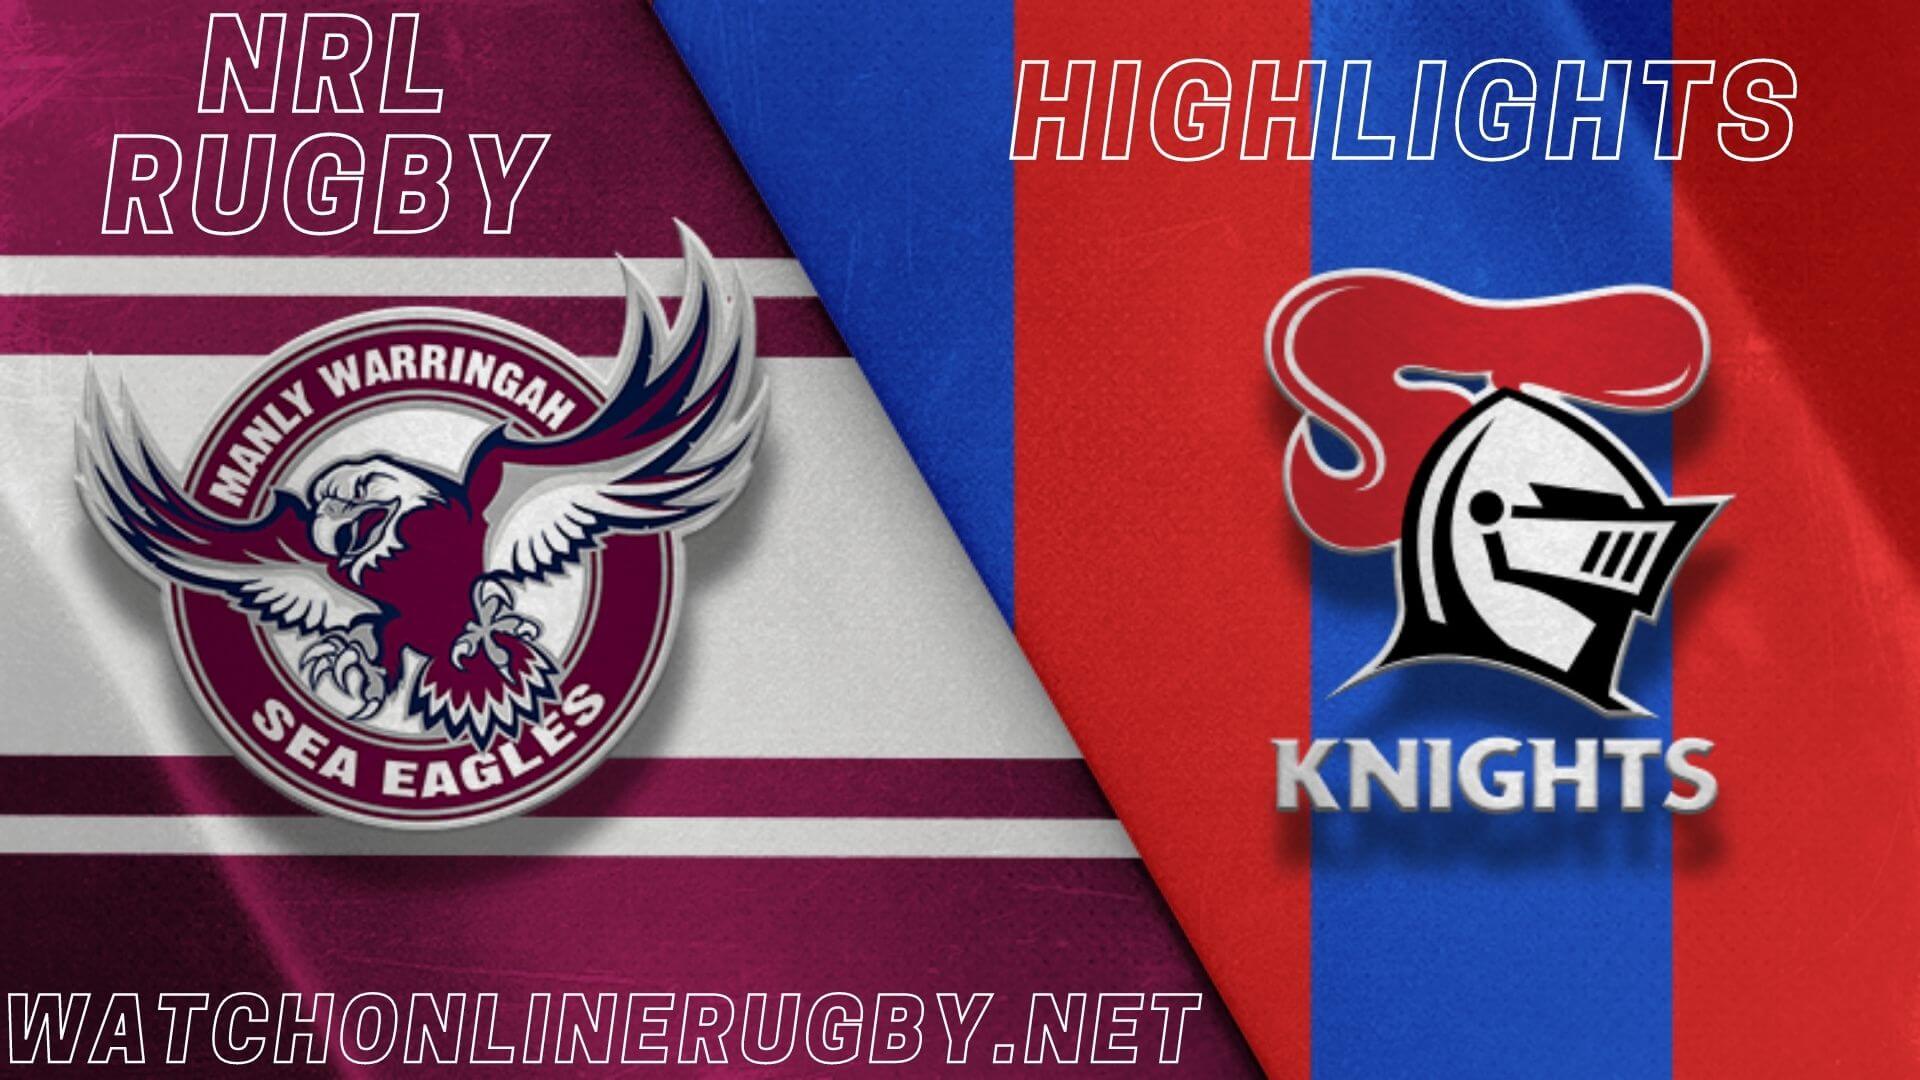 Knights Vs Sea Eagles Highlights RD 5 NRL Rugby